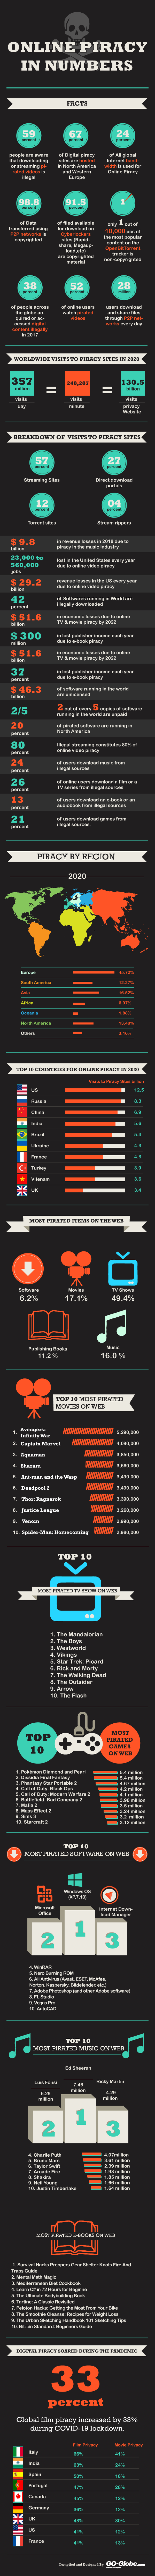 software piracy infographic